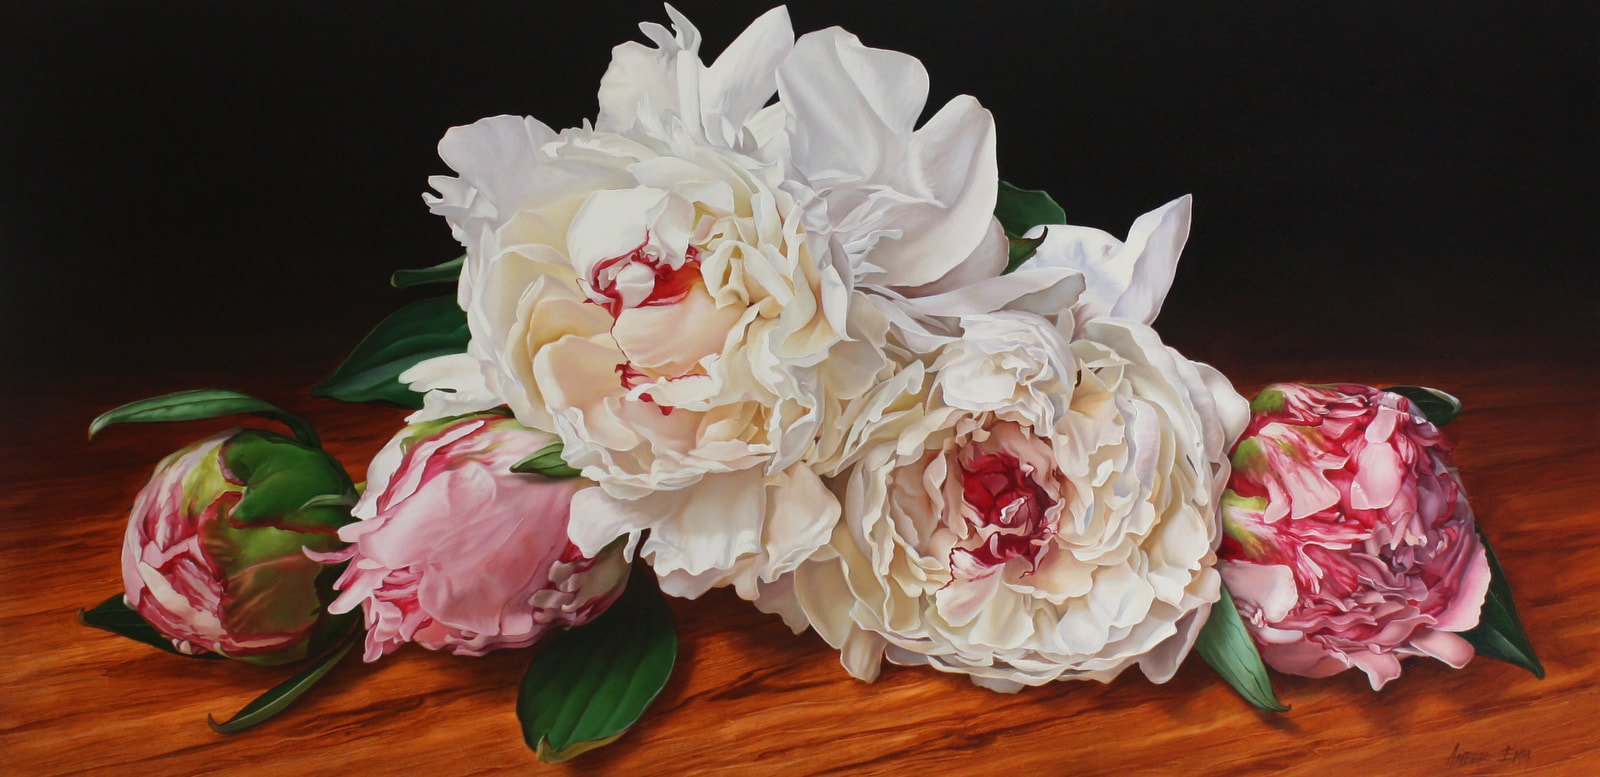 Amber Emm, "Floral Ripples", Oil on Canvas, 1200 x 600mm, 2018, Floral Painting